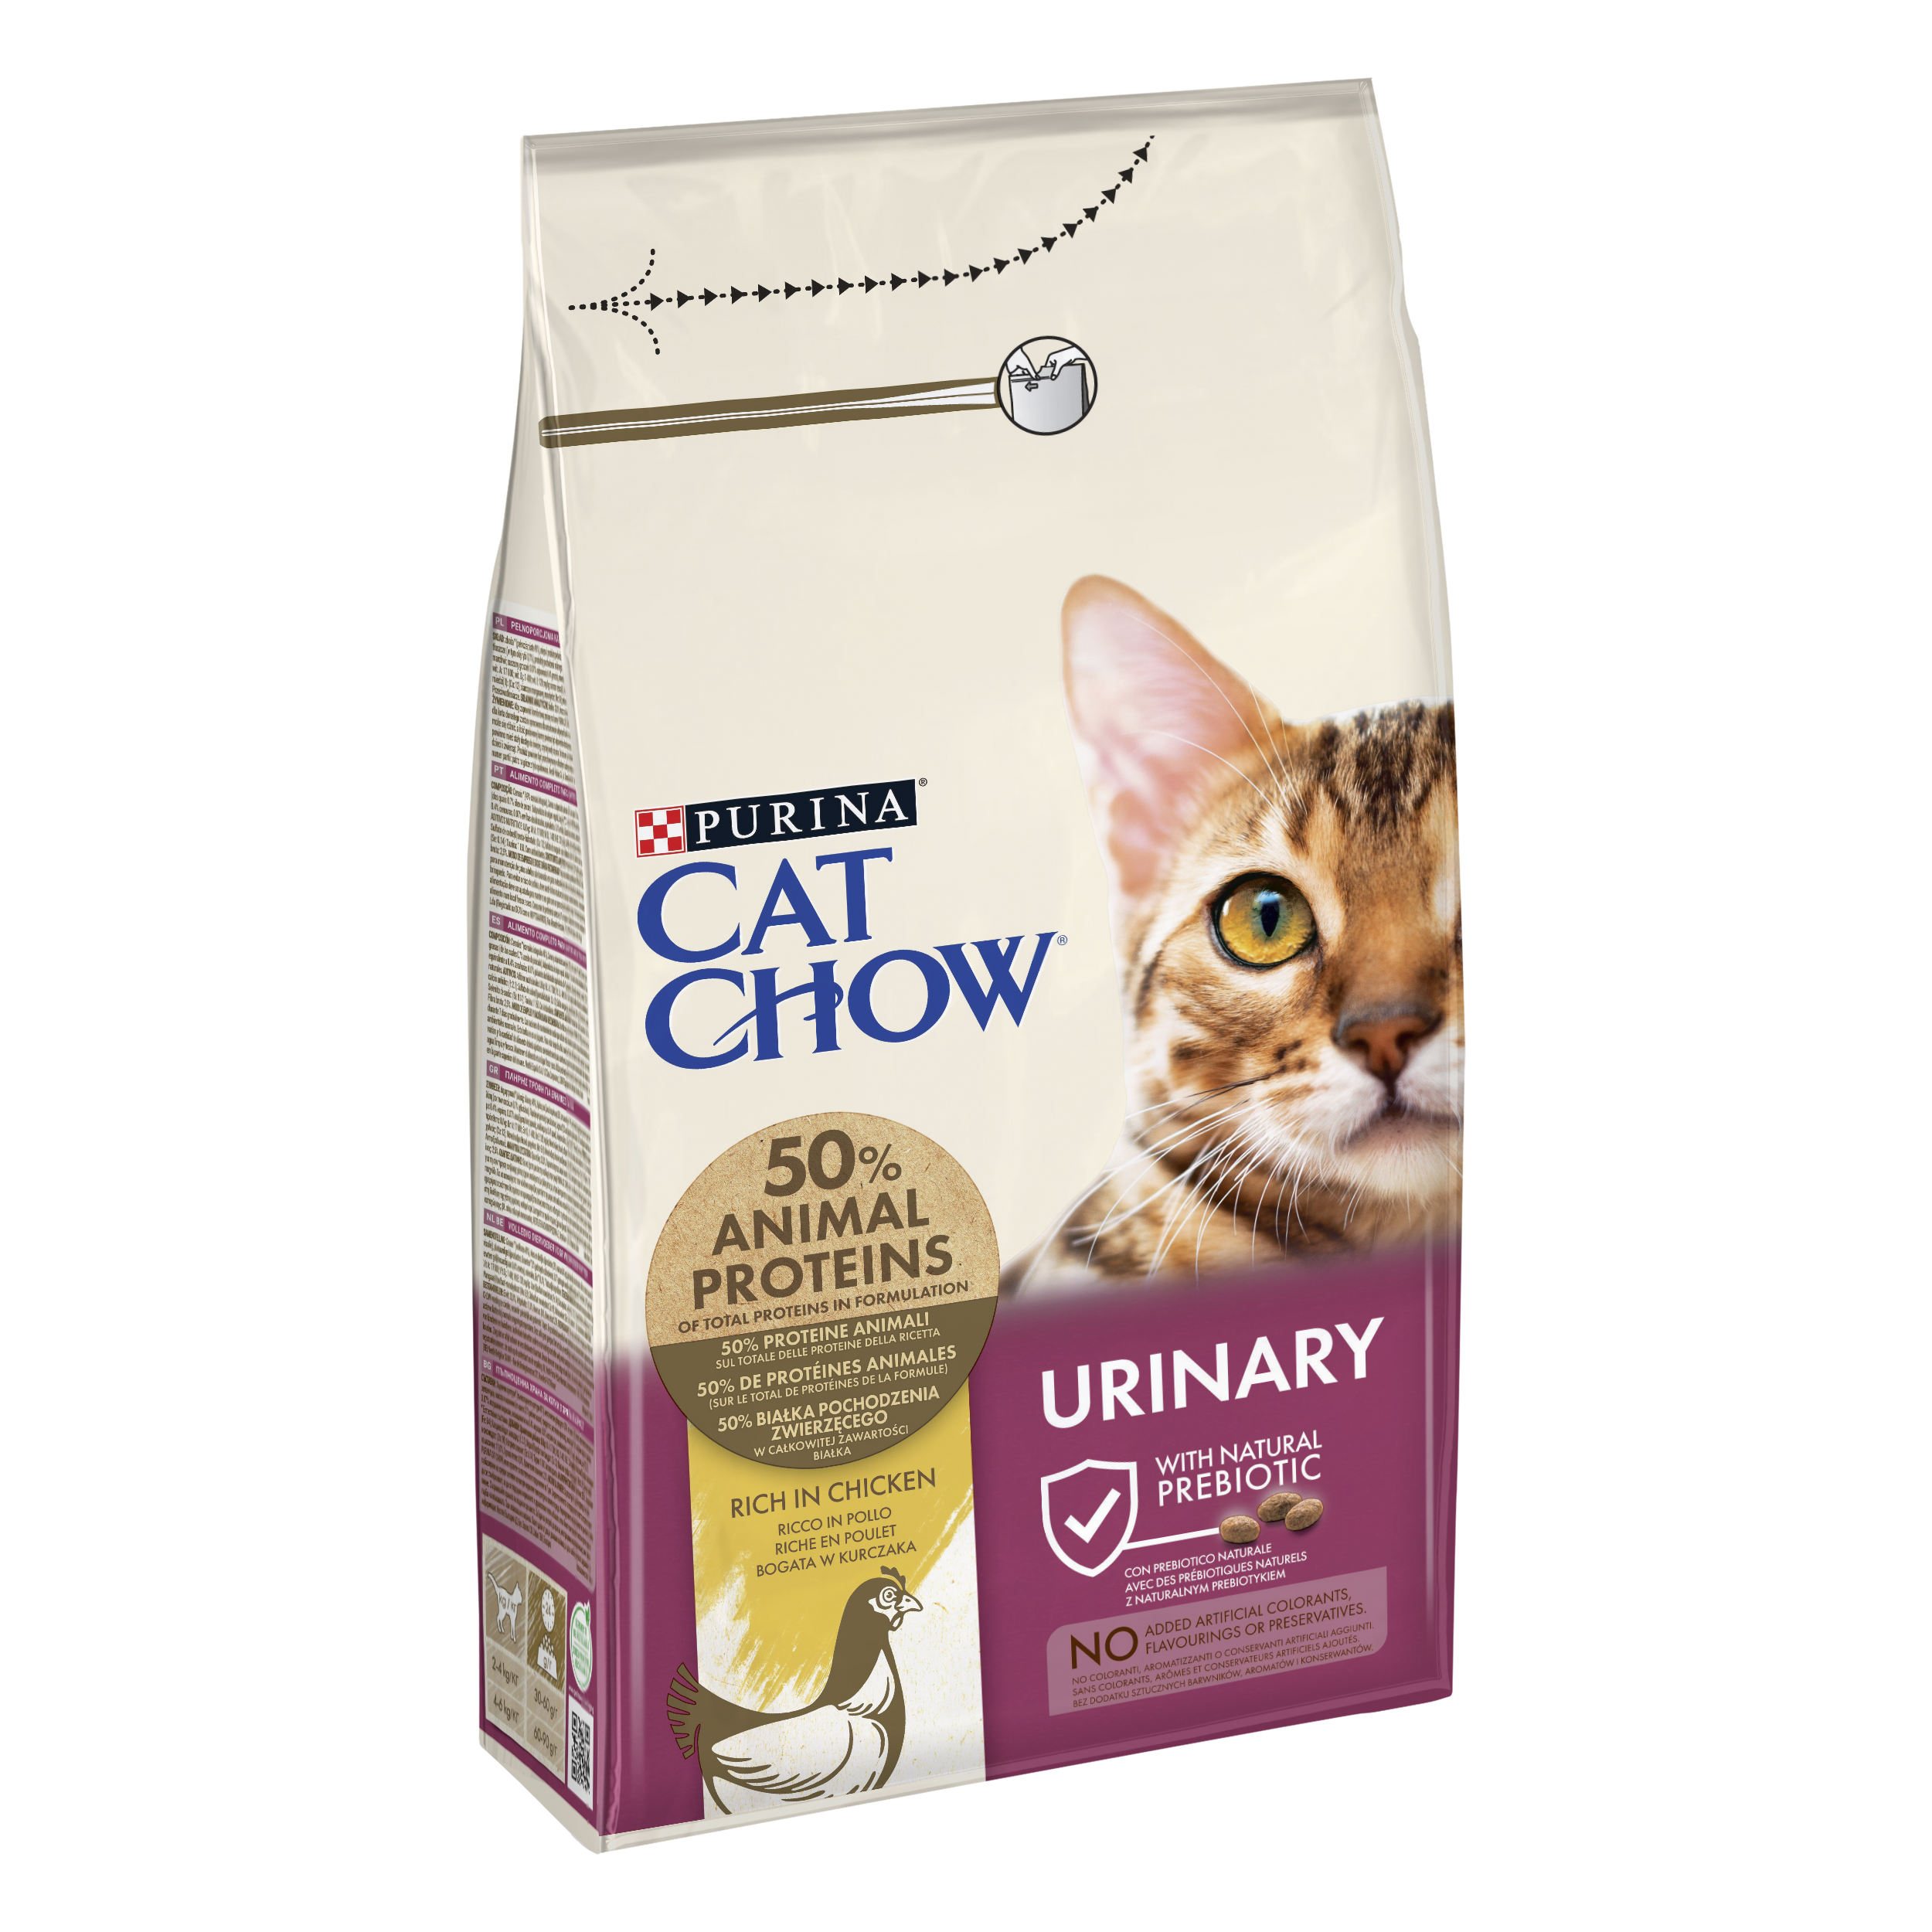 Cat Chow Urinary Tract Health Cat Chow imagine 2022